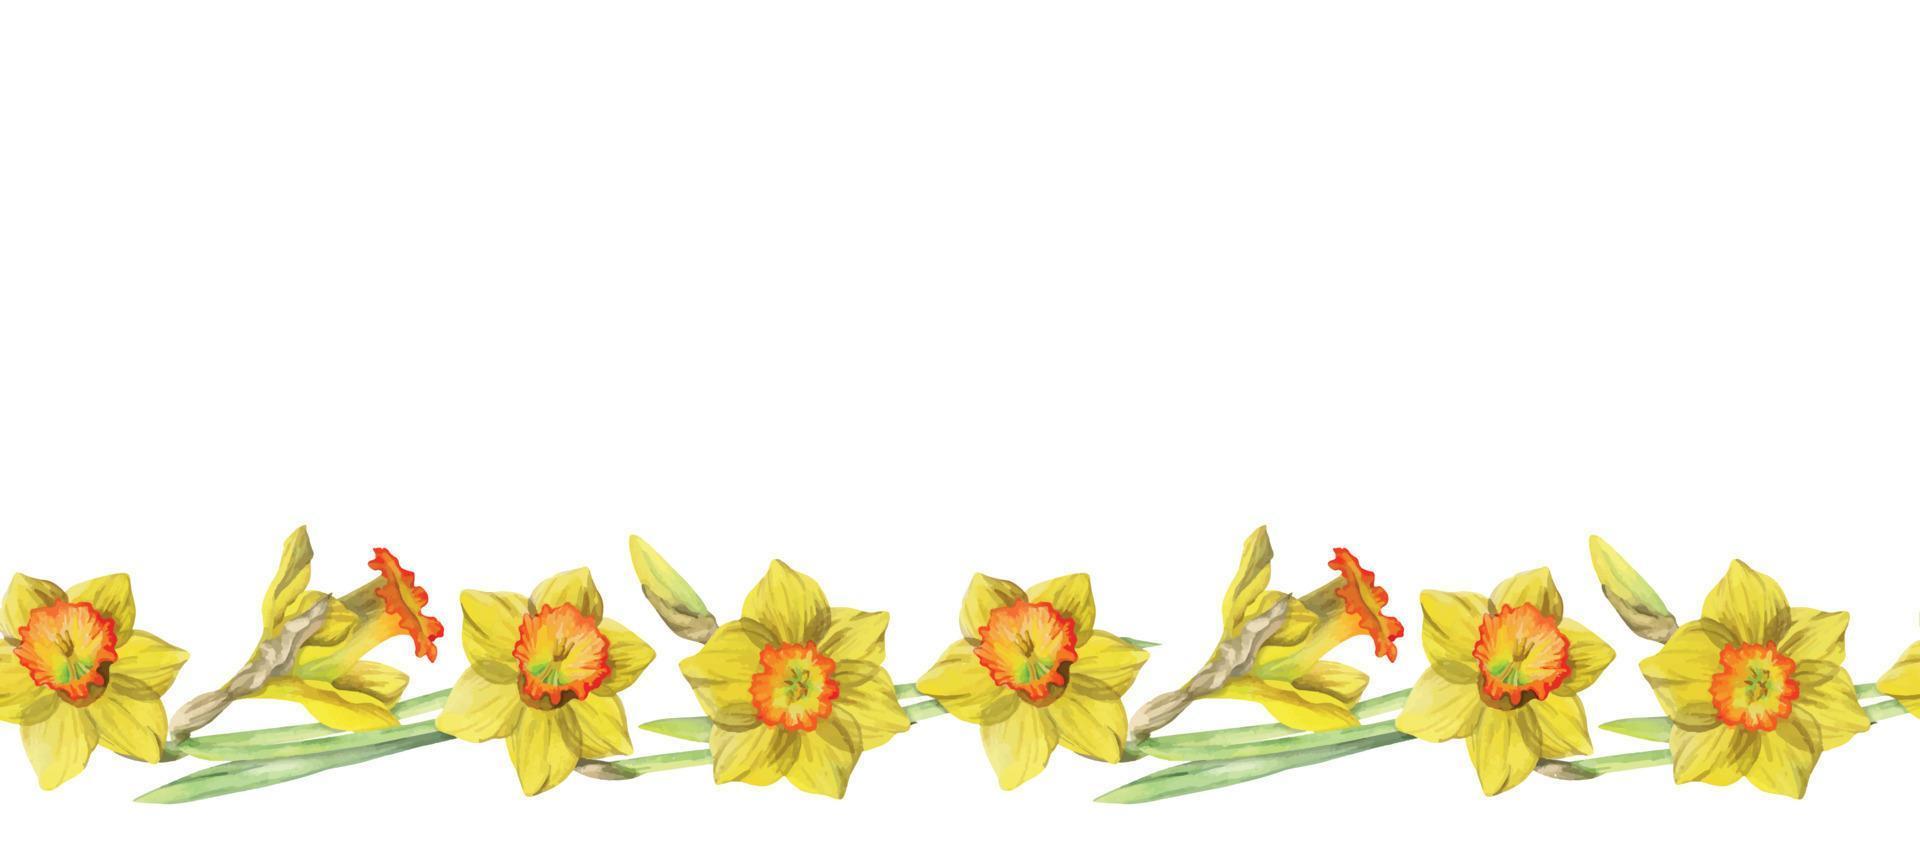 Watercolor hand drawn seamless border with spring flowers, daffodils, crocus, snowdrops. Isolated on white background. Design for invitations, wedding, greeting cards, wallpaper, print, textile vector